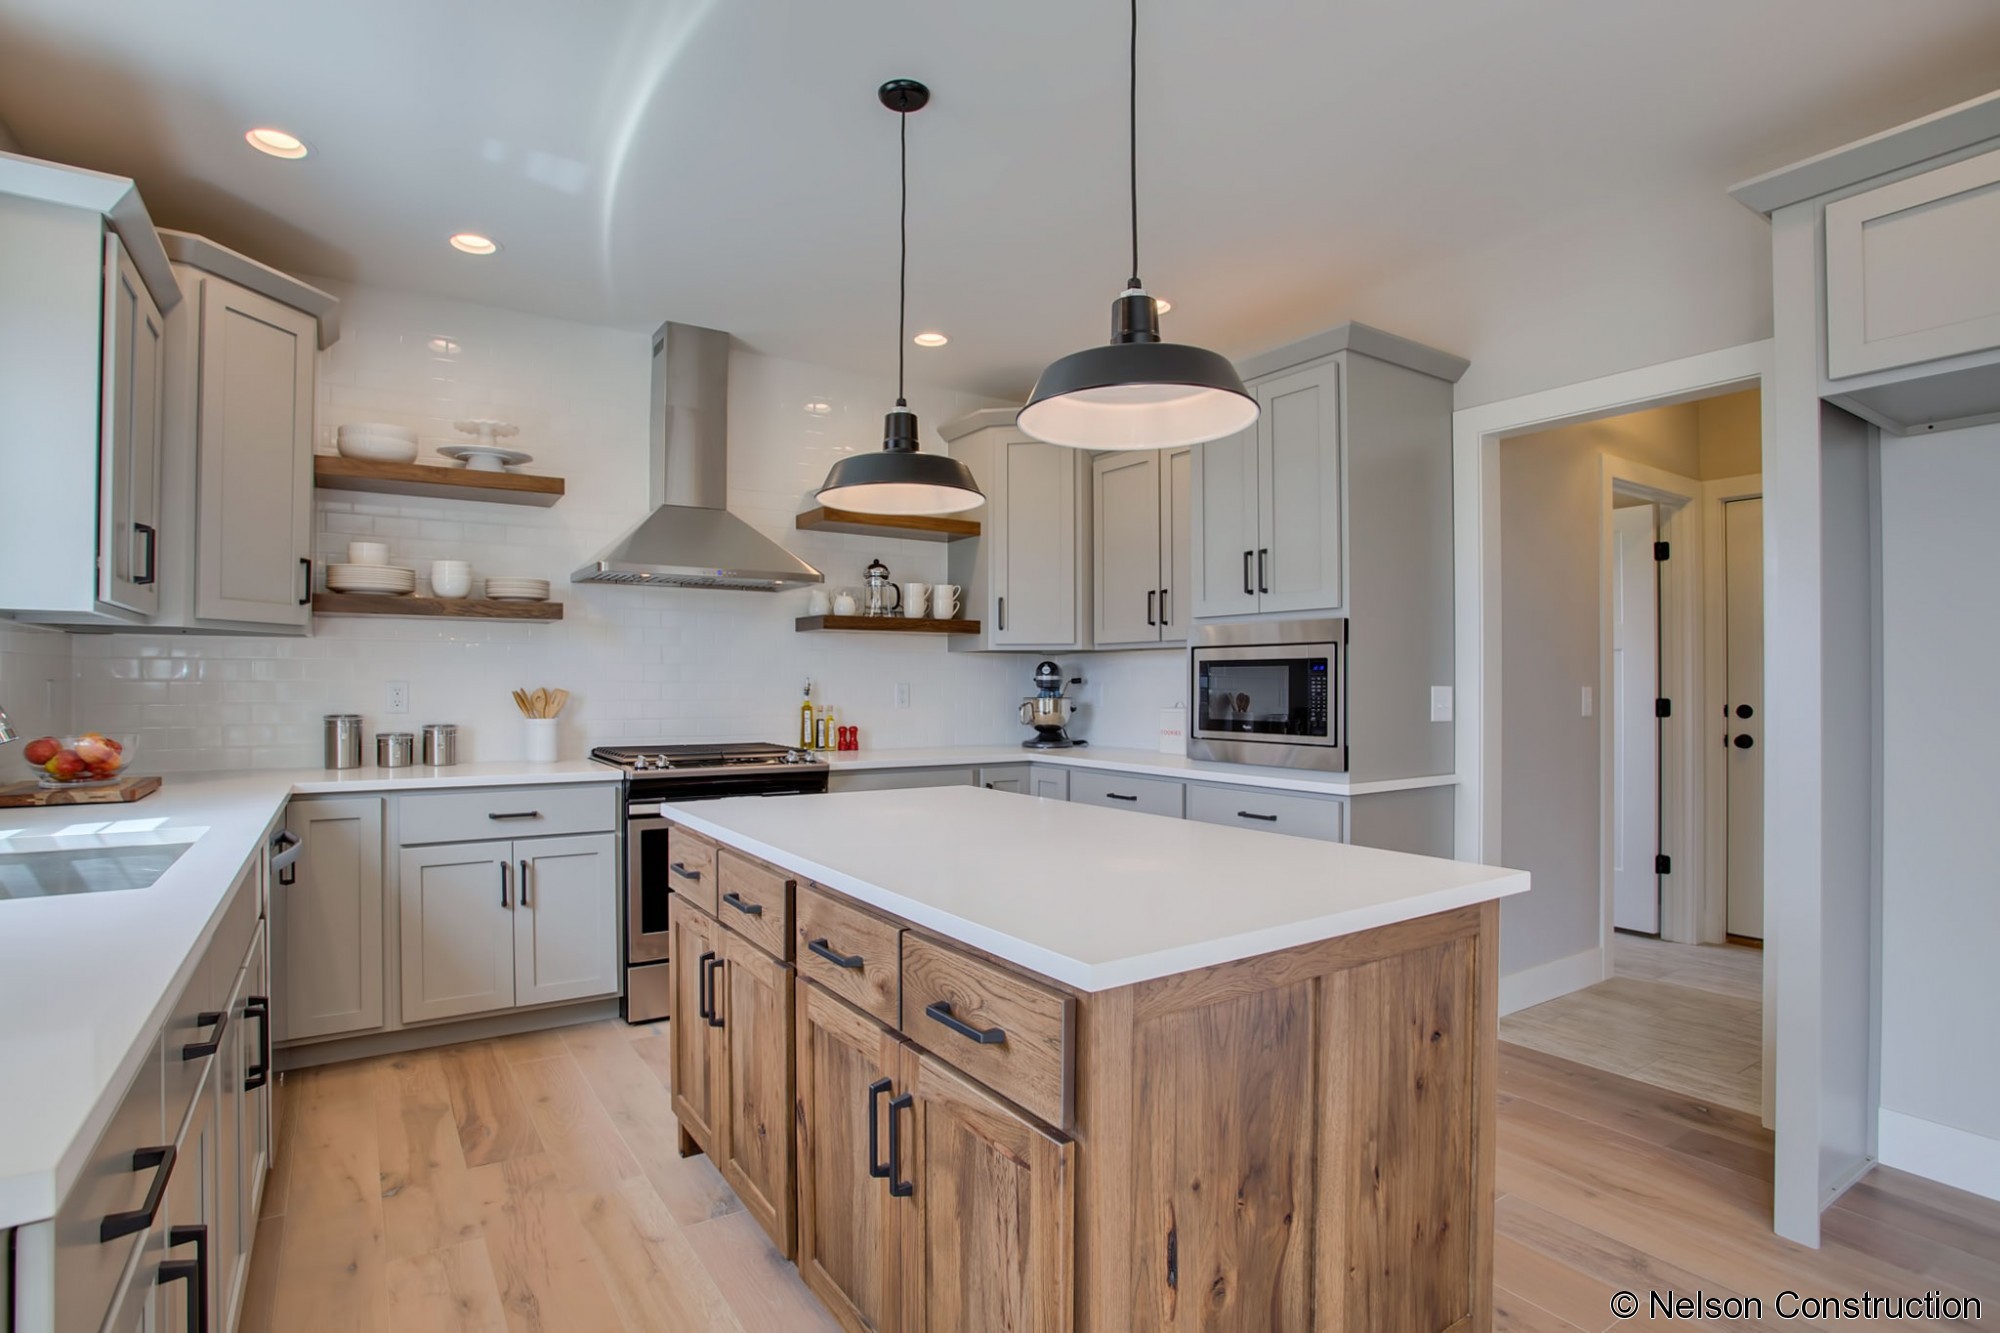 The designer inspired kitchen of this new home features floating shelves, subway tile backsplash, and a stainless hood.